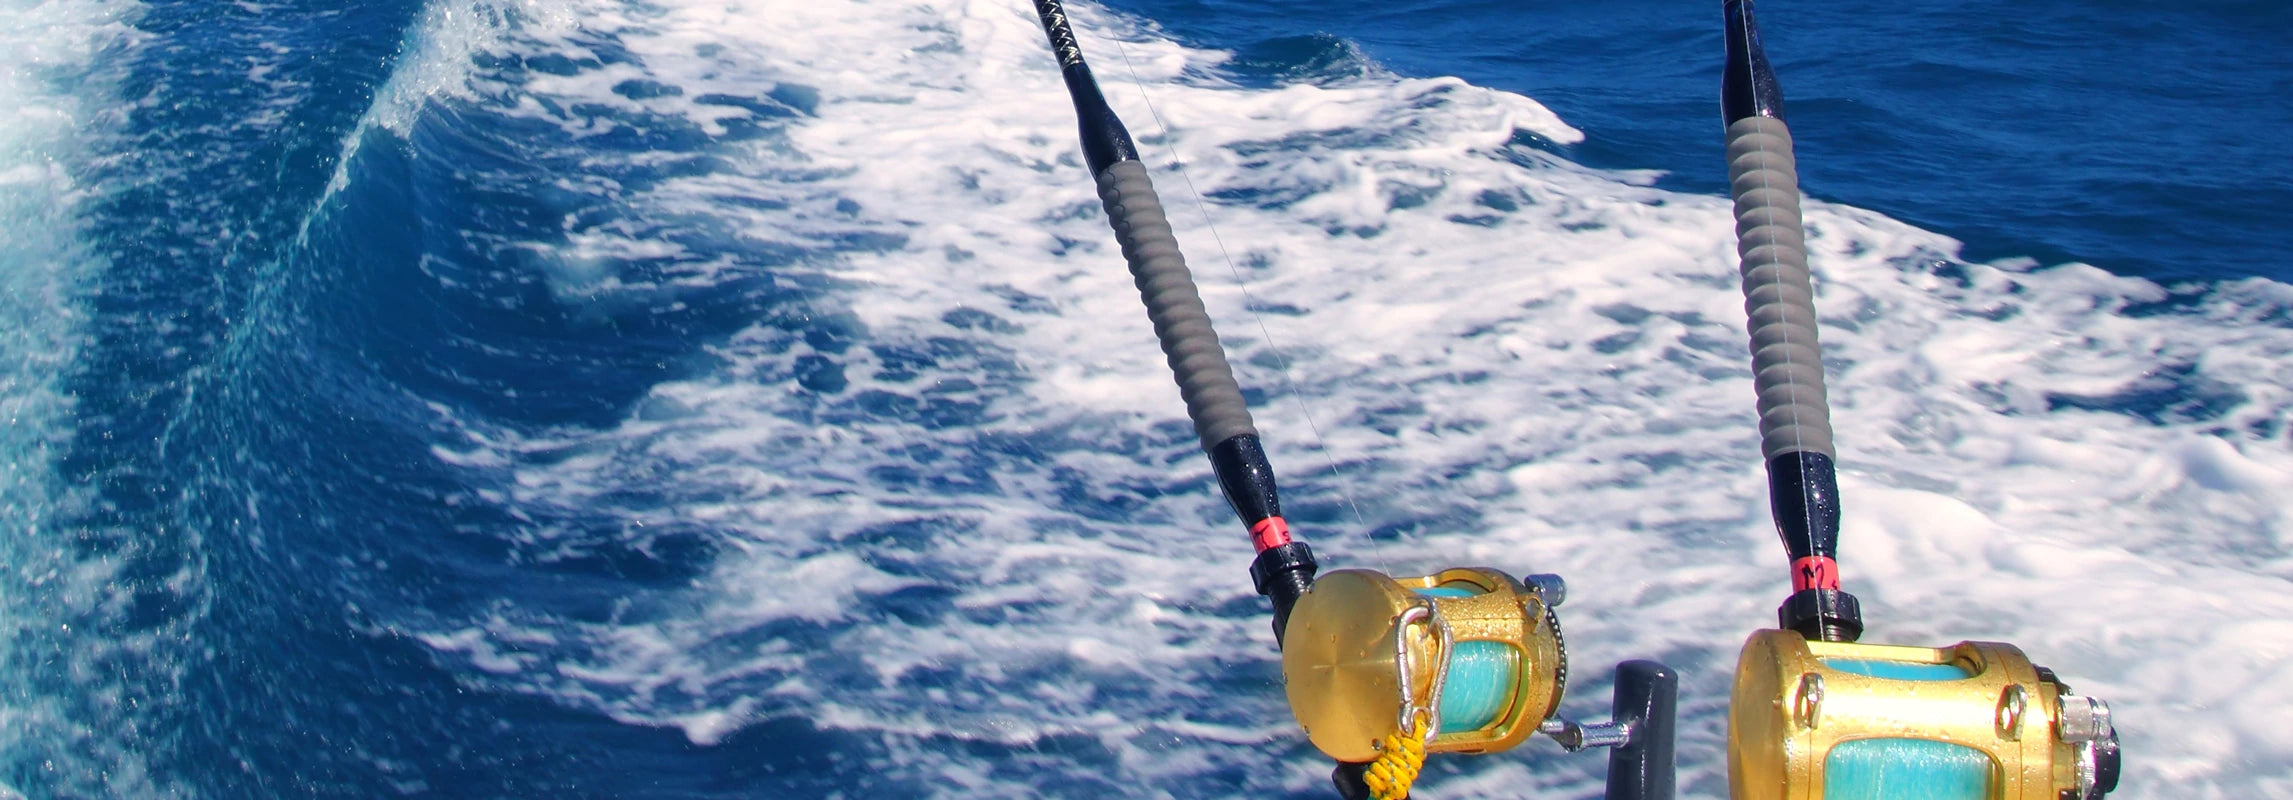 Best Selection Of Saltwater Fishing, Tools, Equipment And Gear – Reef & Reel